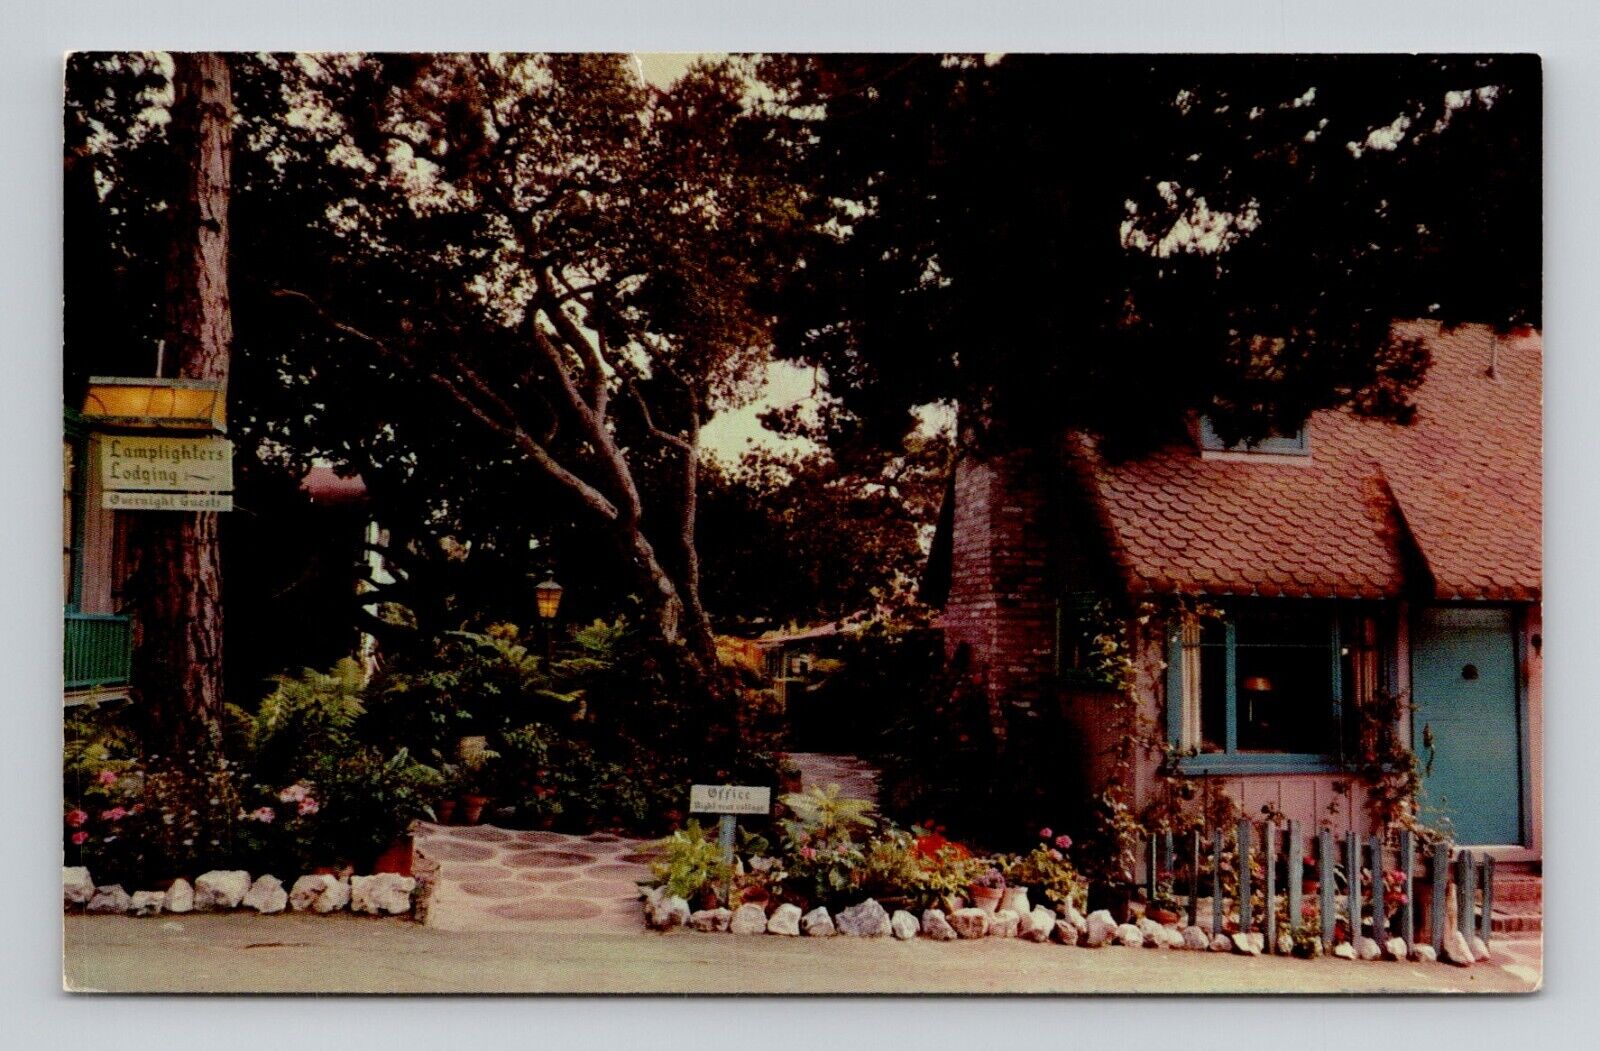 Postcard Carmel-by-the-Sea Lamplighters Lodging California, Vintage Chrome N17